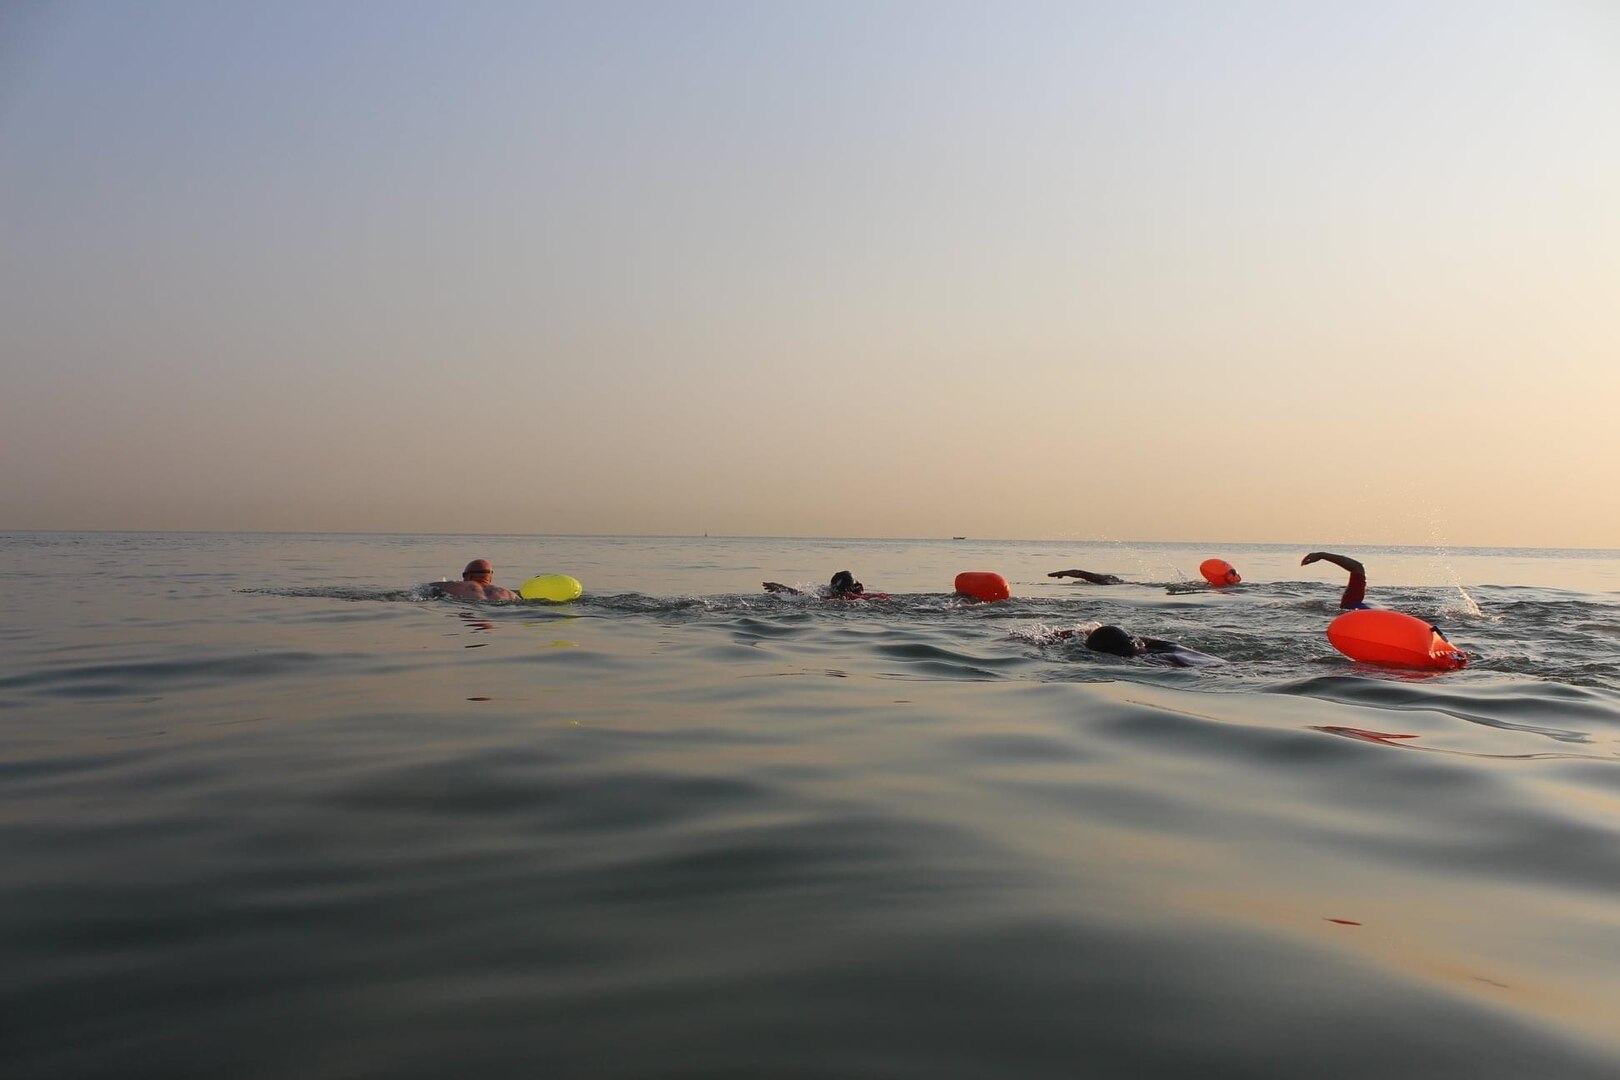 Eric Reich, left, Defense Logistics Agency Disposition Services’ operations supervisor and site lead at Camp Arifjan, leads the way against 30 competitors during a Sept. 18 one kilometer open water swim in the Persian Gulf at Abu Halifa Beach.